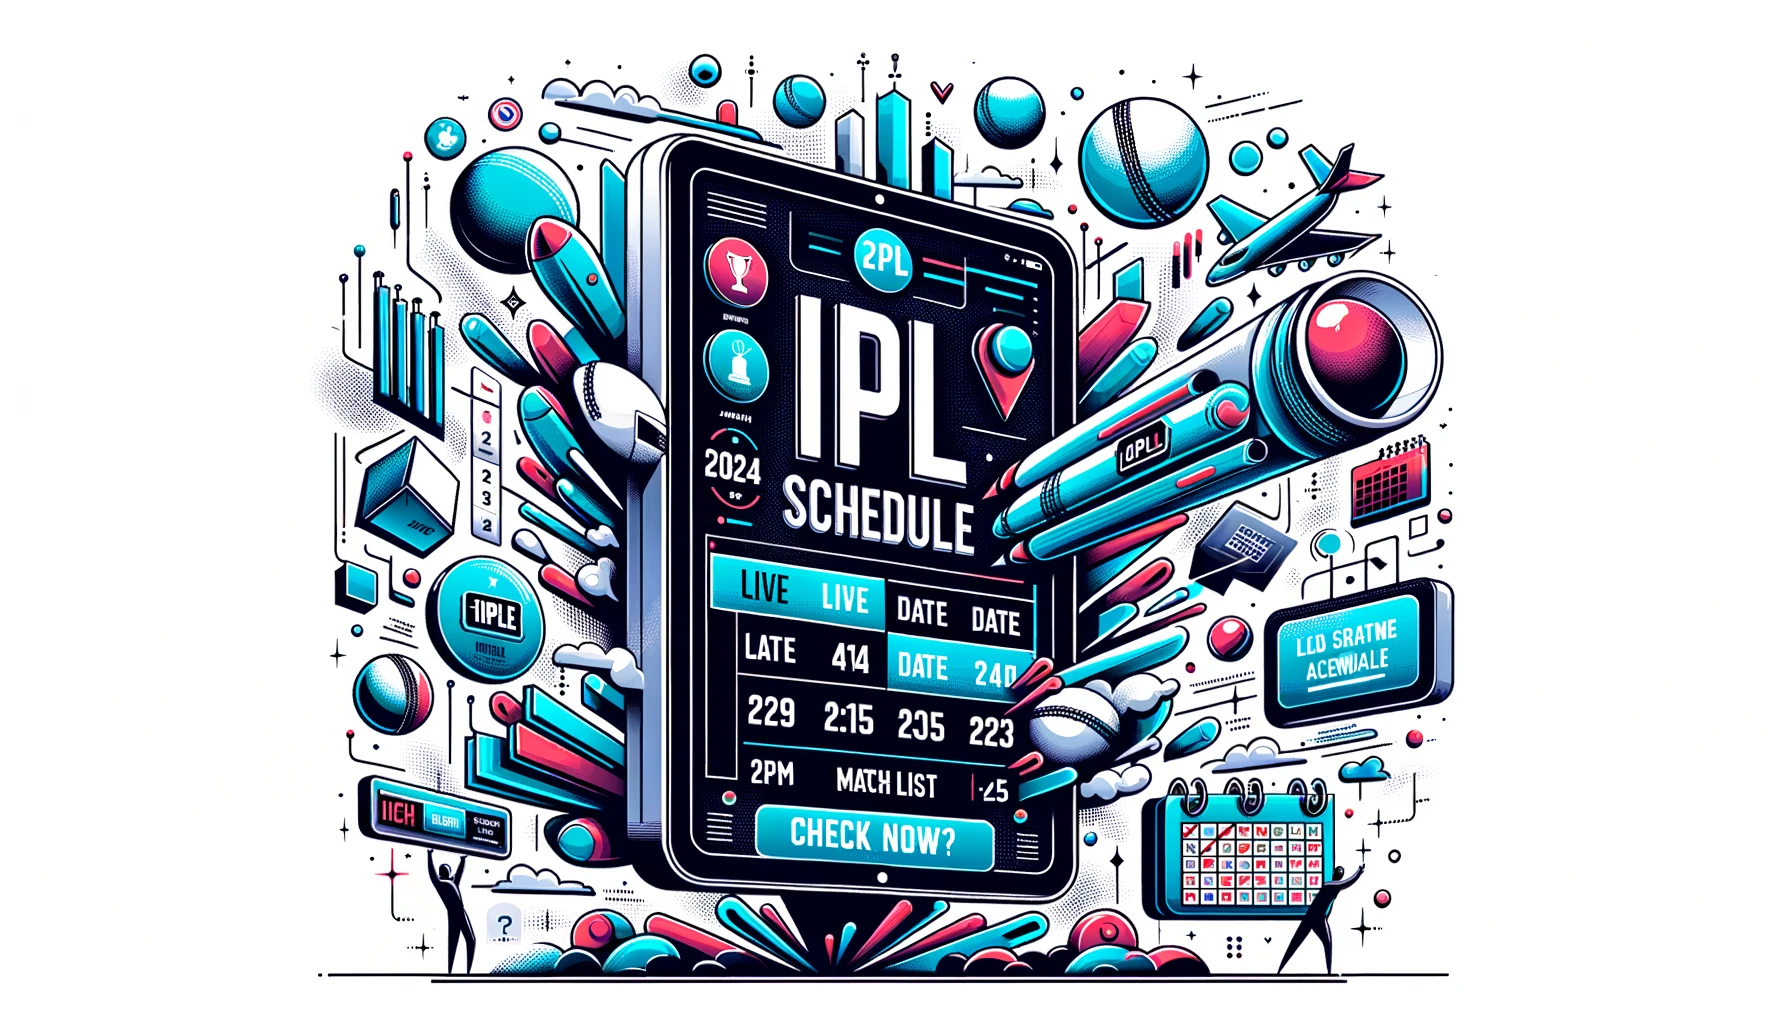 IPL 2024 Schedule Check Live Date, Table, and Match List Now!